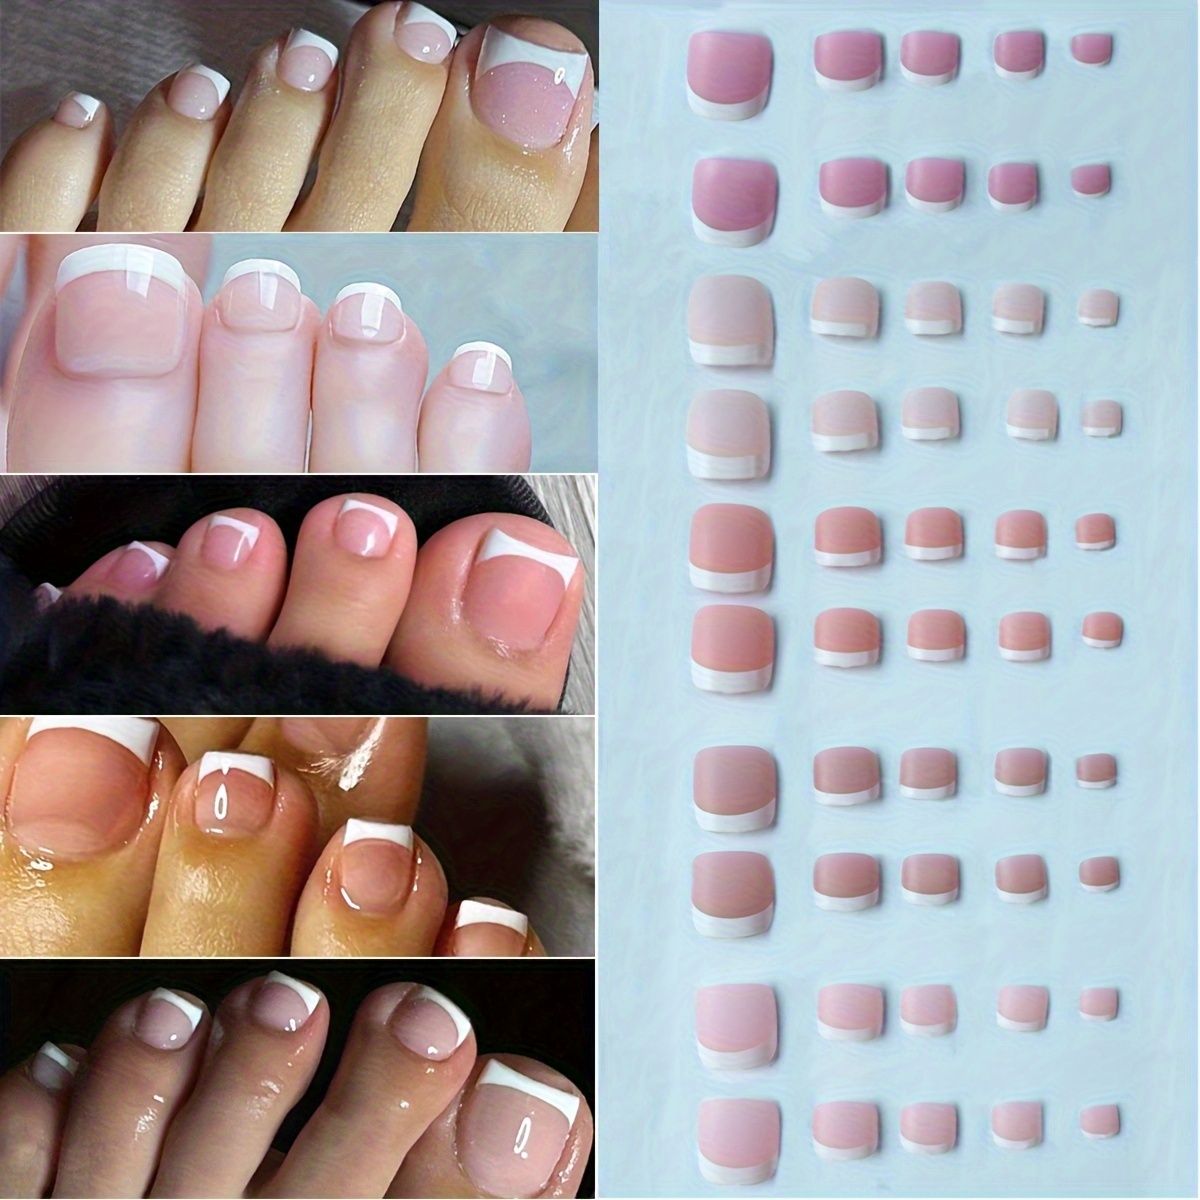 

150pcs/5 Styles Square Shaped Wearable Toe Nails Toenails With 5 Nail Files & 5 Nail Adhesive Stickers Kit For Parties